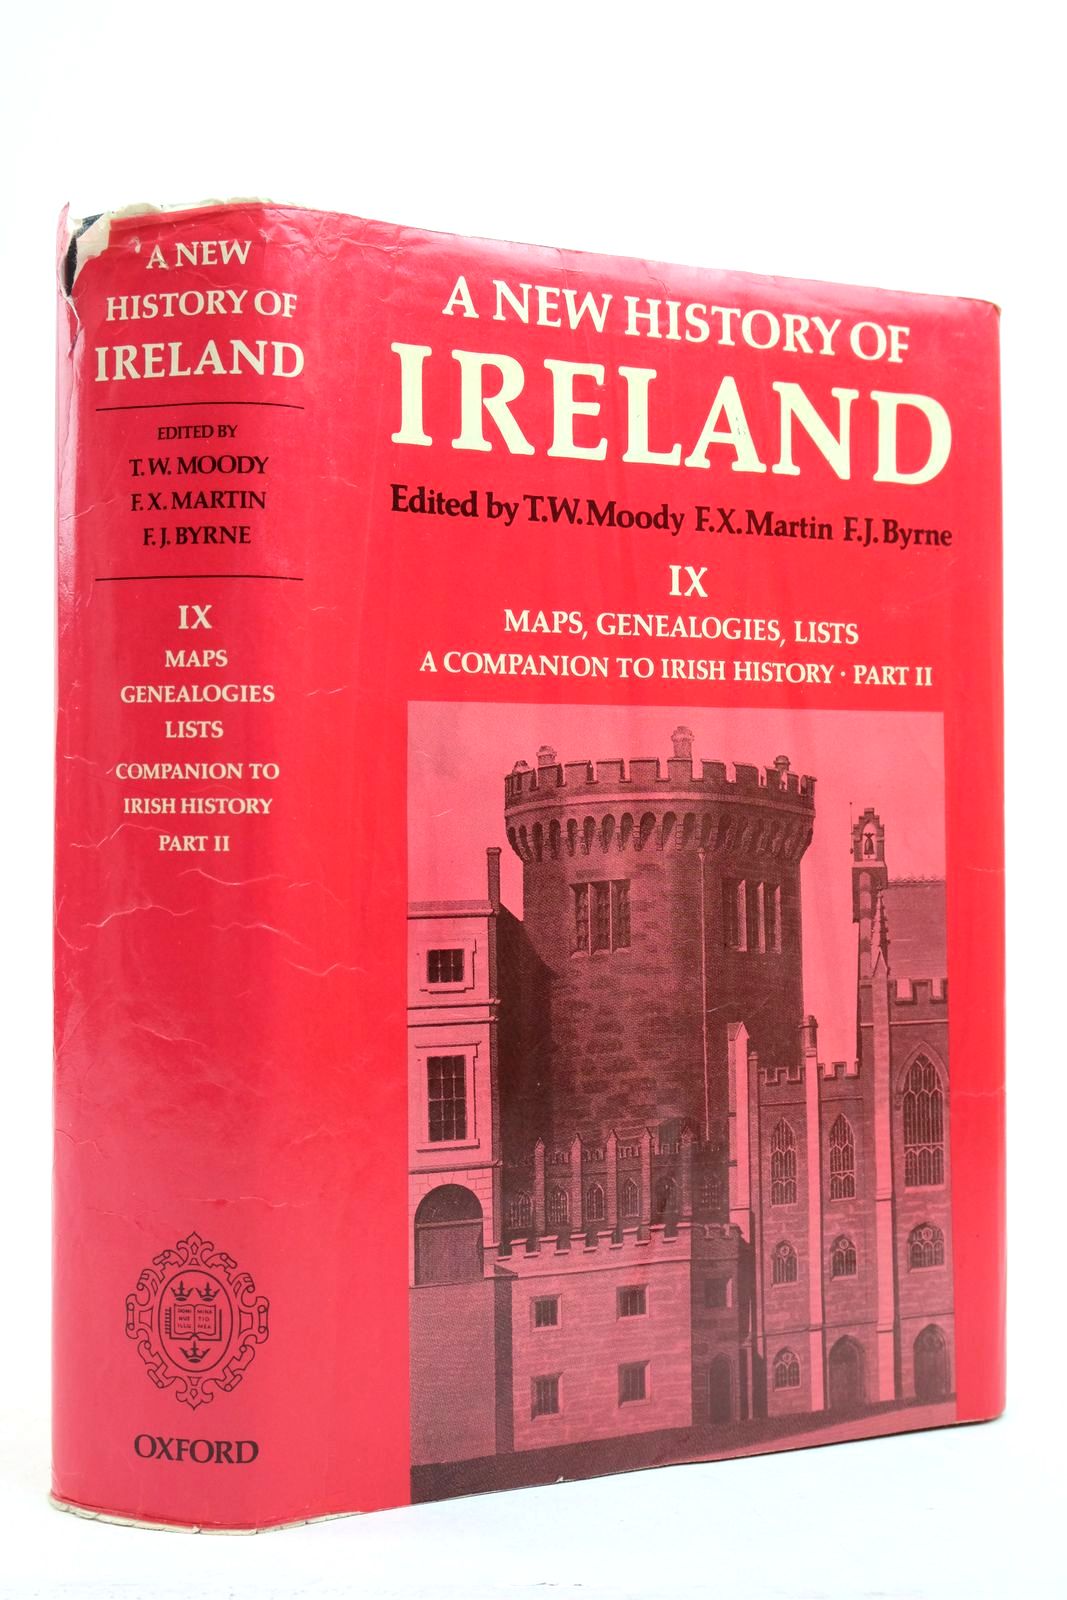 Photo of A NEW HISTORY OF IRELAND IX: MAPS, GENEALOGIES, LISTS written by Moody, T.W. Martin, F.X. Byrne, F.J. published by Oxford at the Clarendon Press (STOCK CODE: 2140542)  for sale by Stella & Rose's Books